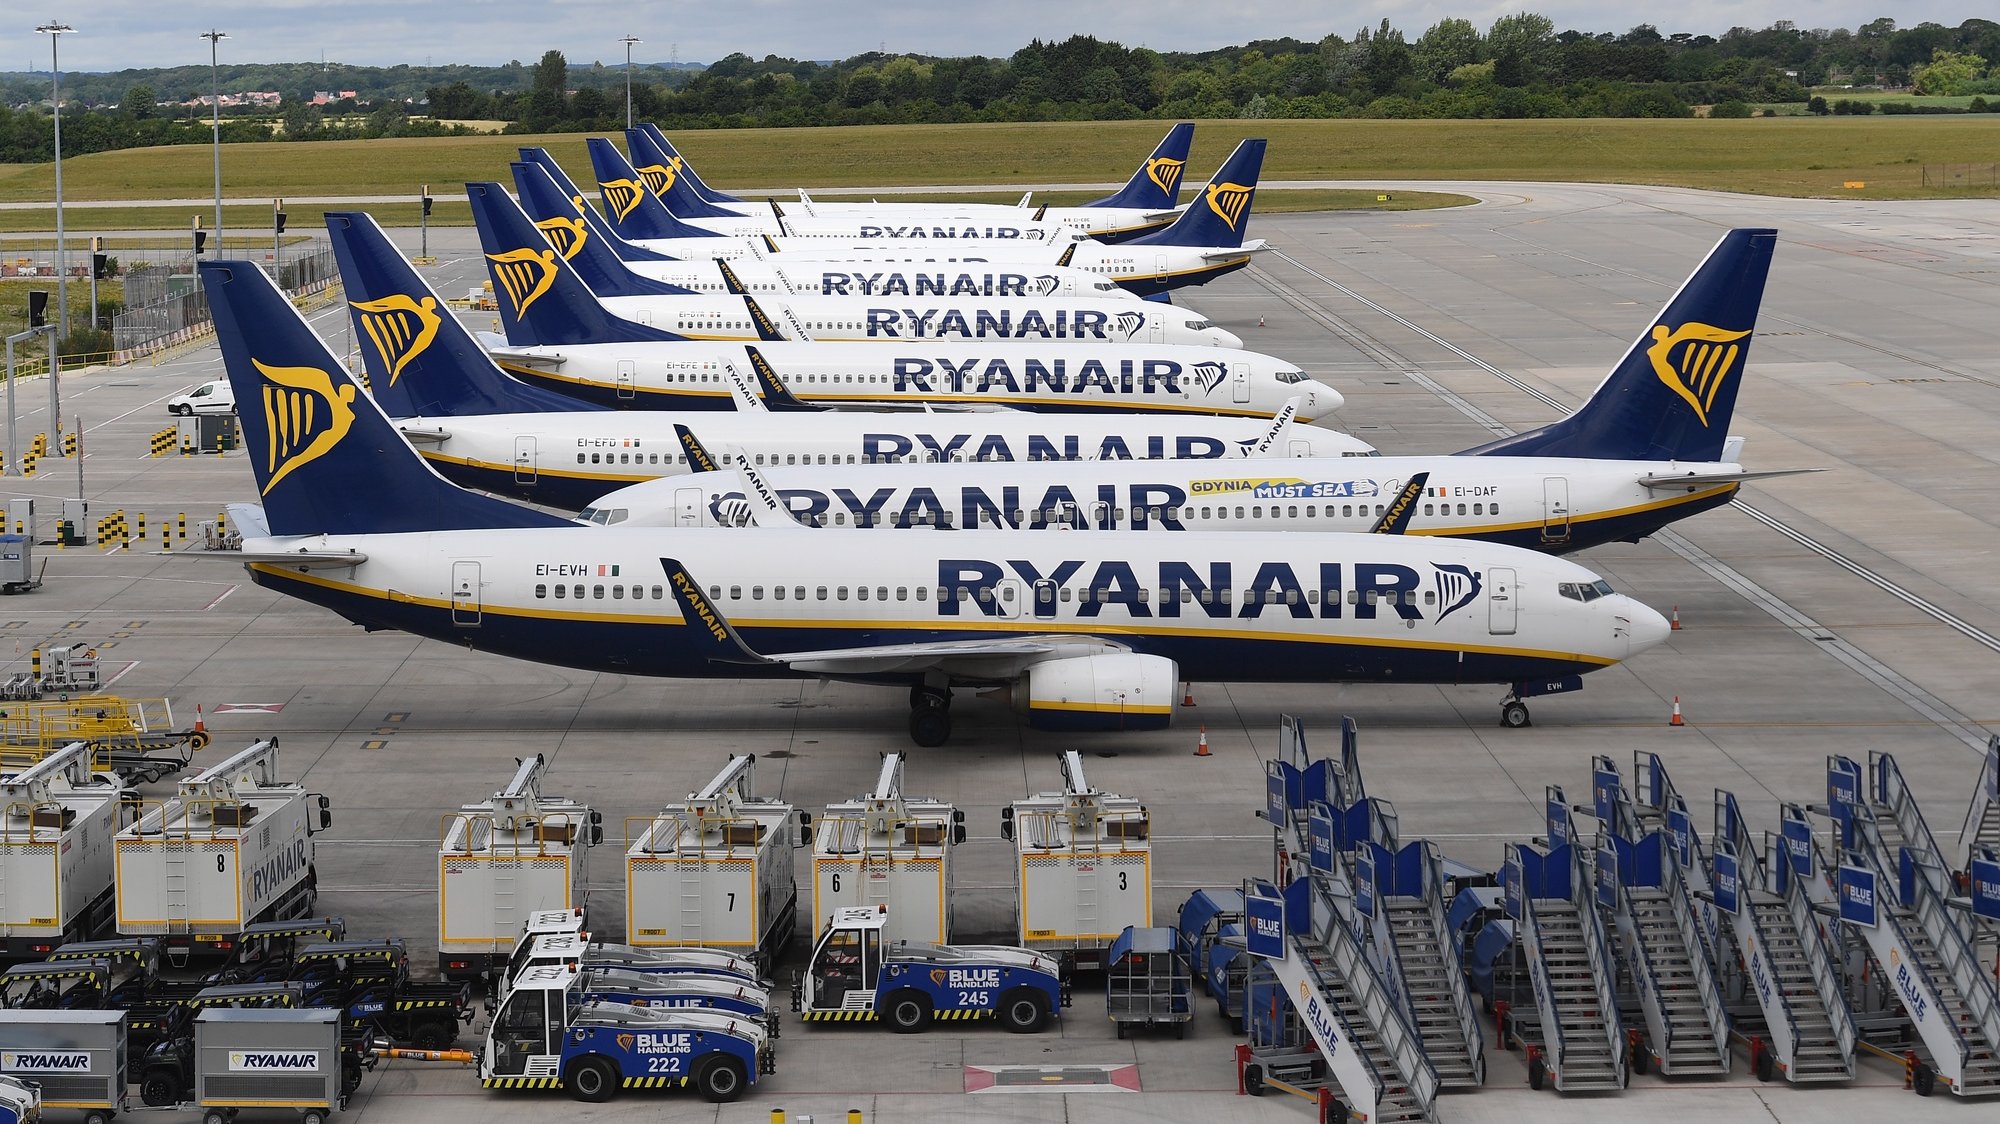 epa08568713 (FILE) - Ryanair aircraft at Stansted Airport in London, Britain, 01 July 2020 (reissued 27 July 2020). Ryanair, that suffered considerably of the pandemic of SARS-CoV-2 coronavirus which causes the Covid-19 disease, released their 1st quarter ended June 2020 results on 27 July 2020 saying they suffered a loss of 185 million euro as a result of having to ground their entire fleet of planes during the epidemic from mid-March to end of June because of EU-imposed travel and flight restrictions. The company made a 243 million euro profit in same quarter in 2019.  EPA/ANDY RAIN